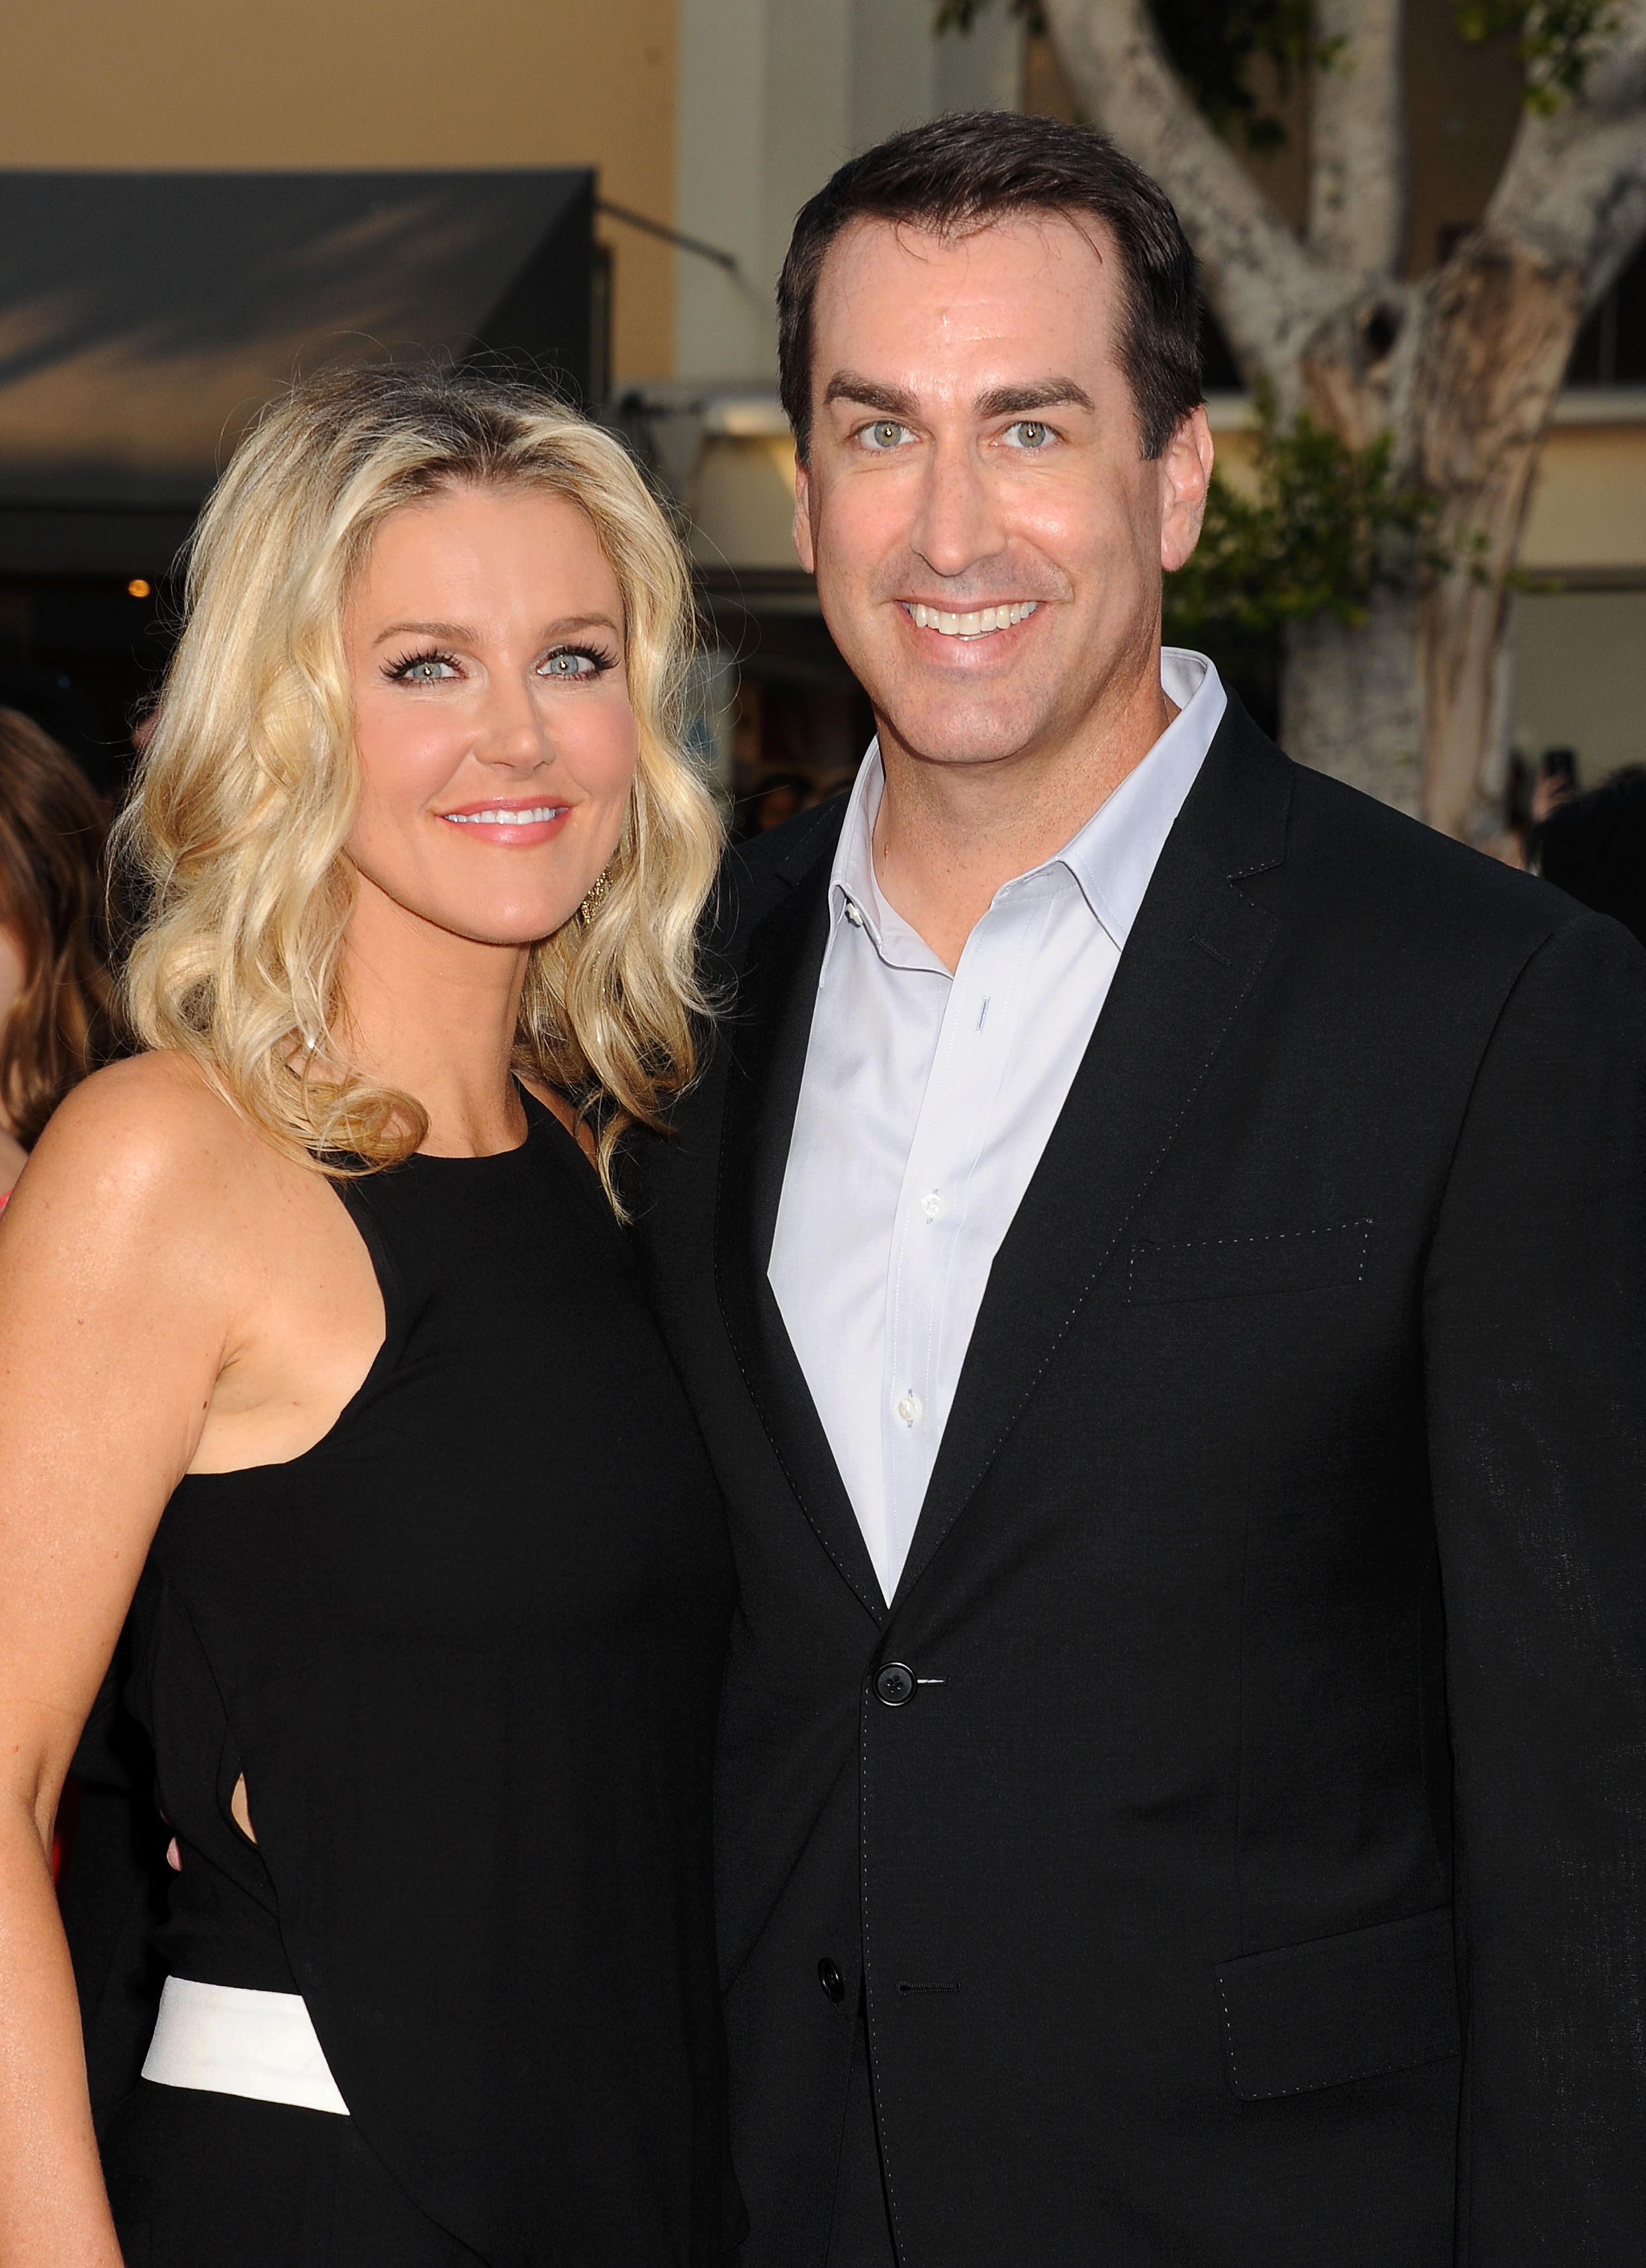 Tiffany Riggle and Rob Riggle at the Los Angeles premiere of "22 Jump Street" on June 10, 2014, in Westwood, California. | Source: Getty Images